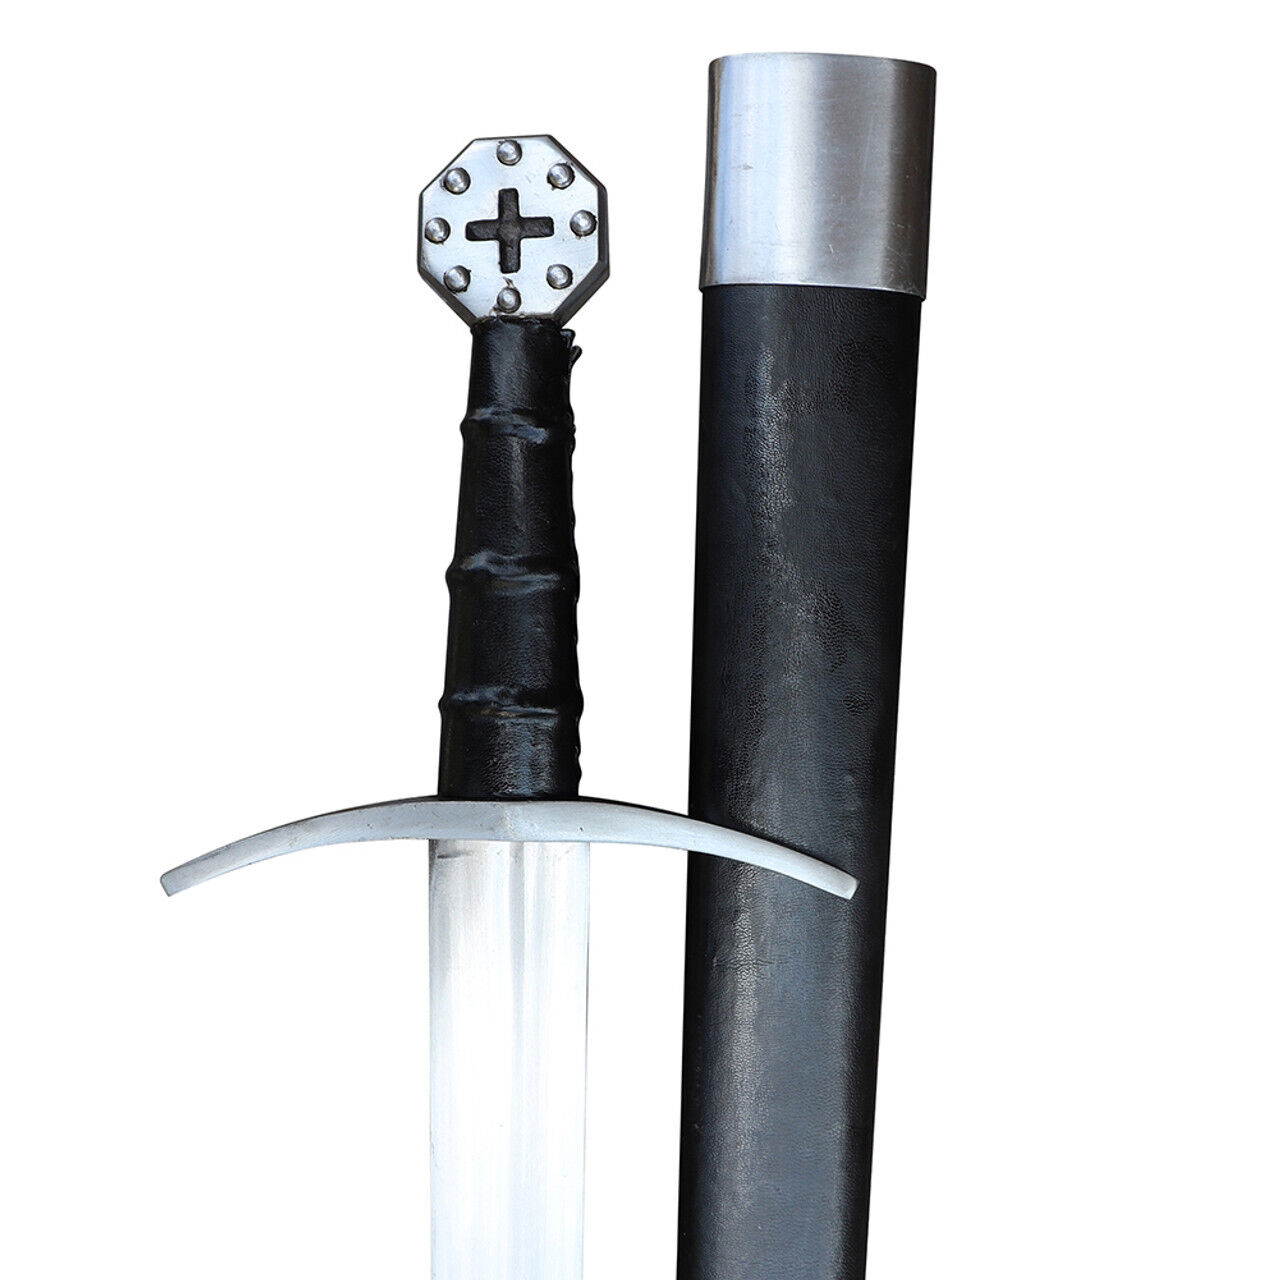 LEGENDAY DECORATIVE MEDIEVAL RENAISSANCE HOLY KNIGHT TEMPLAR SWORD WITH SCABBARD